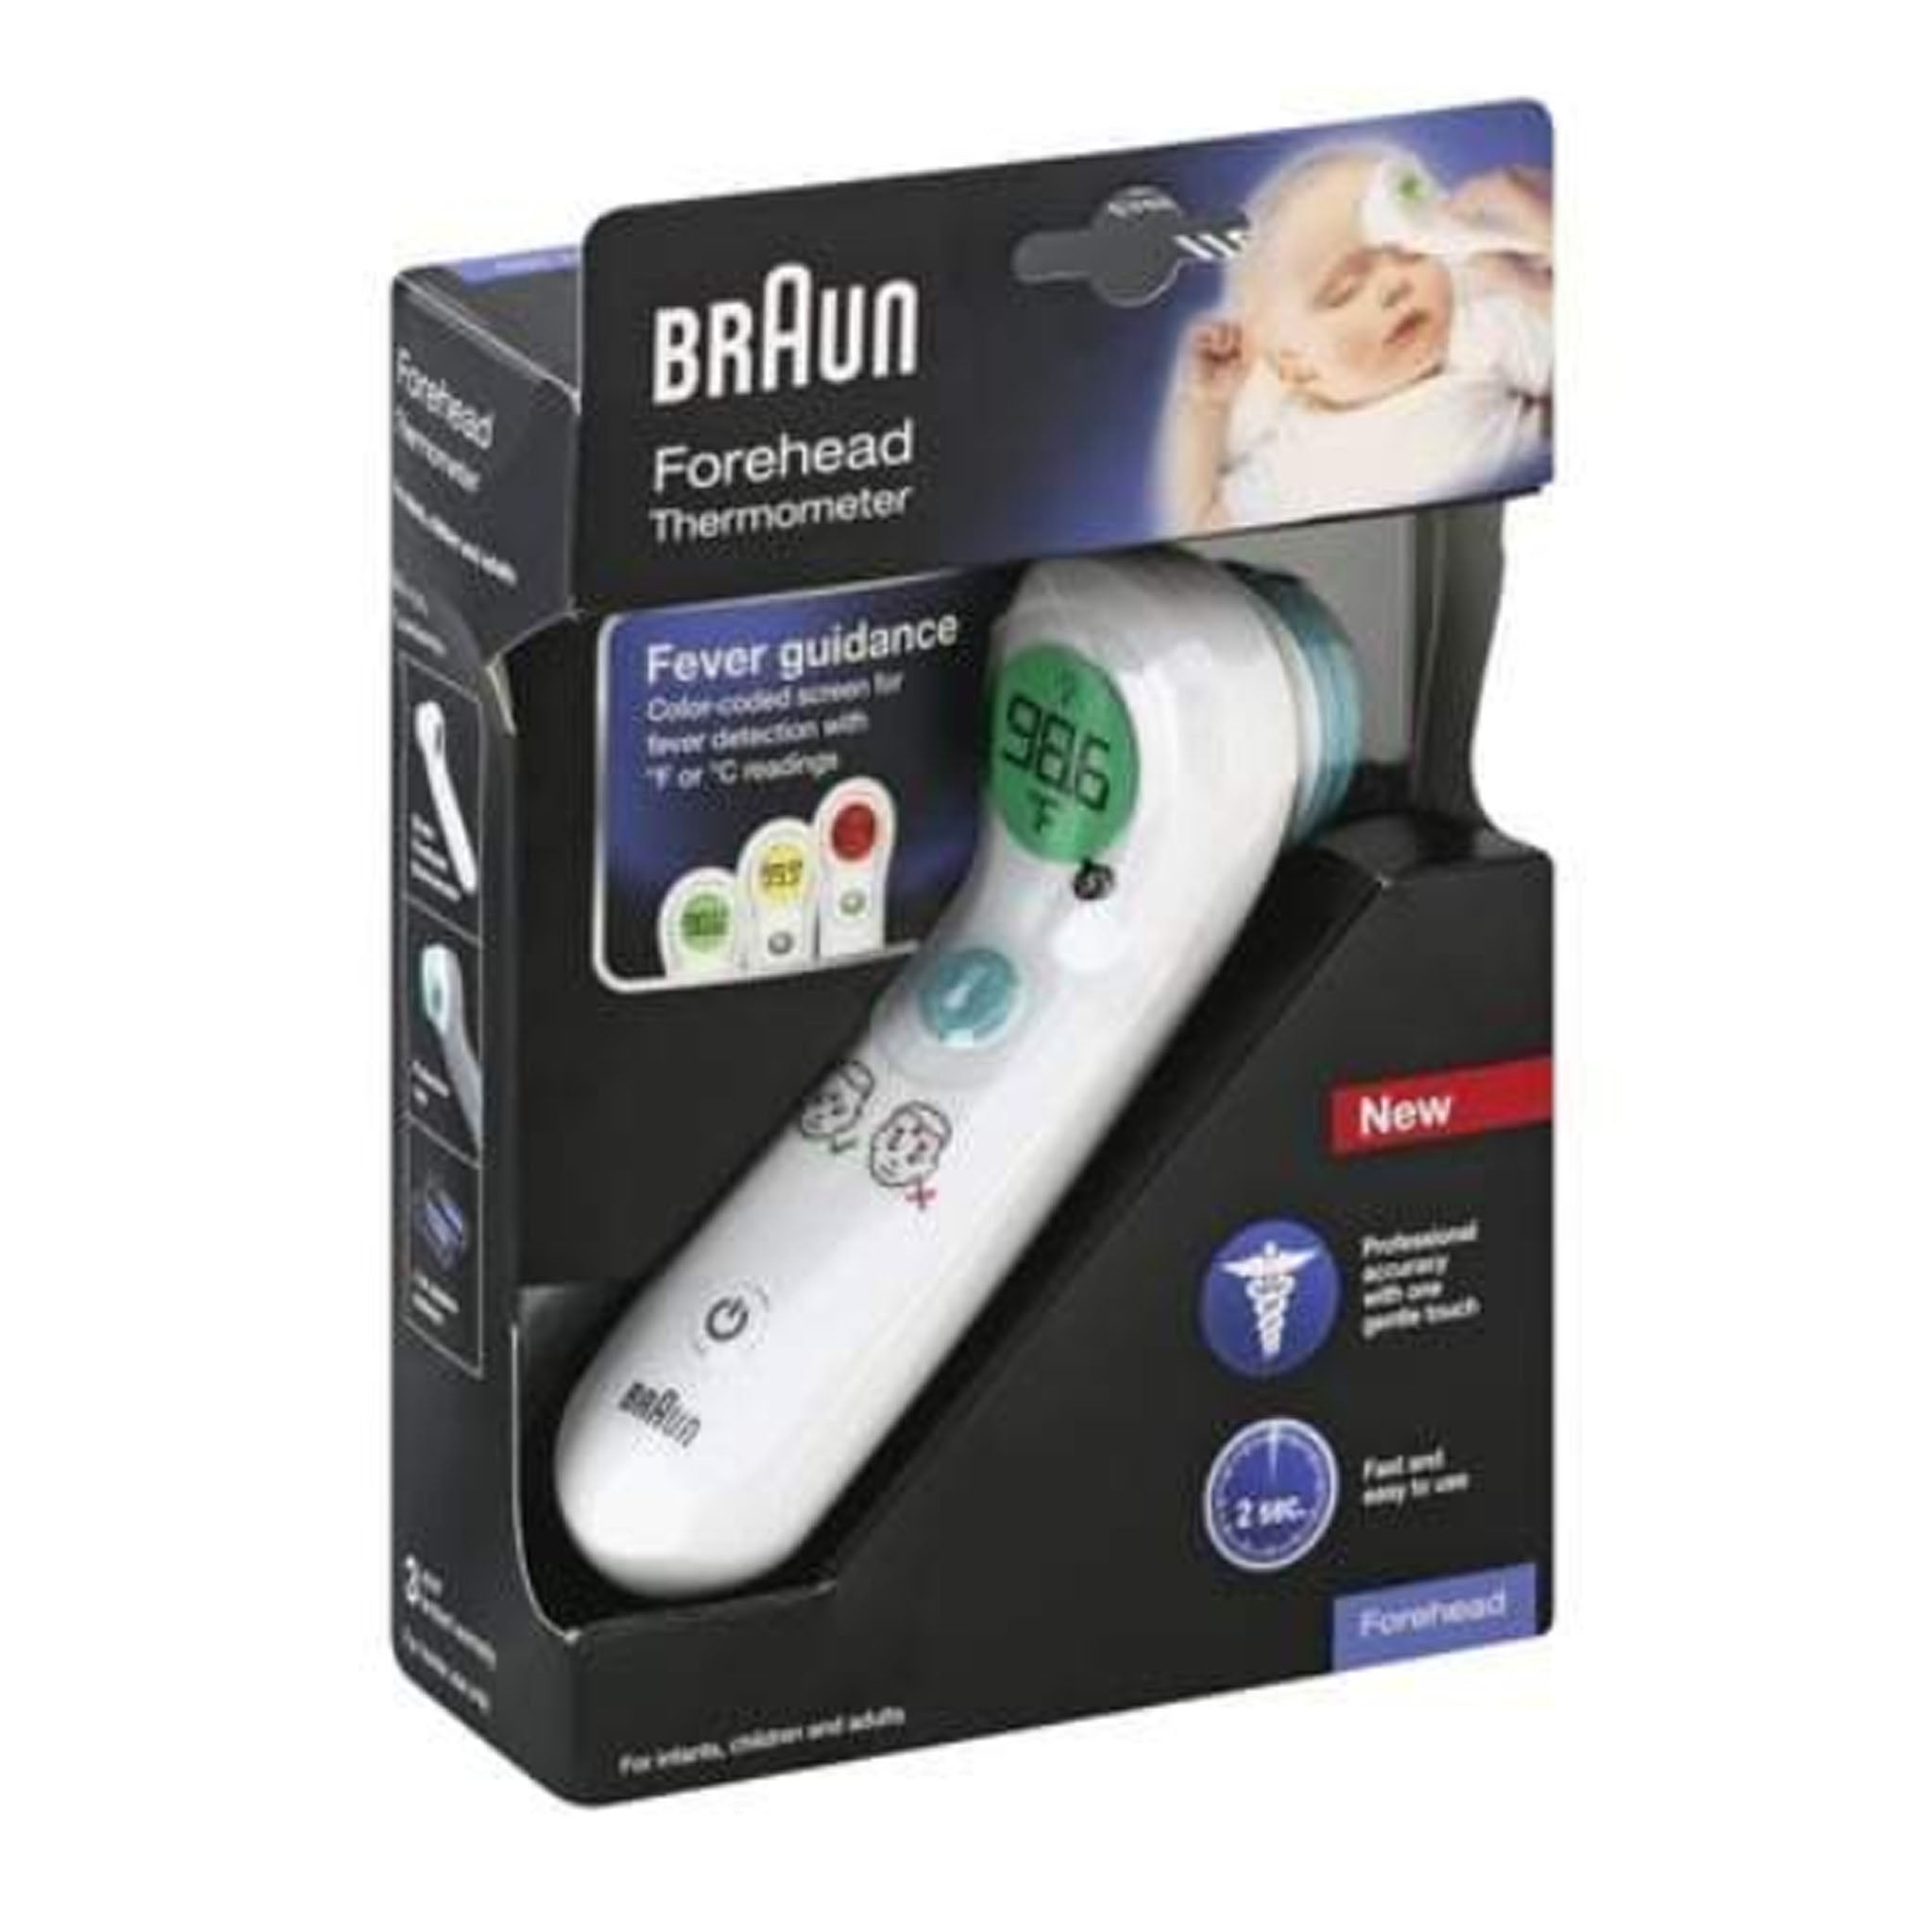 Braun Forehead Thermometer with Fever Guidance System